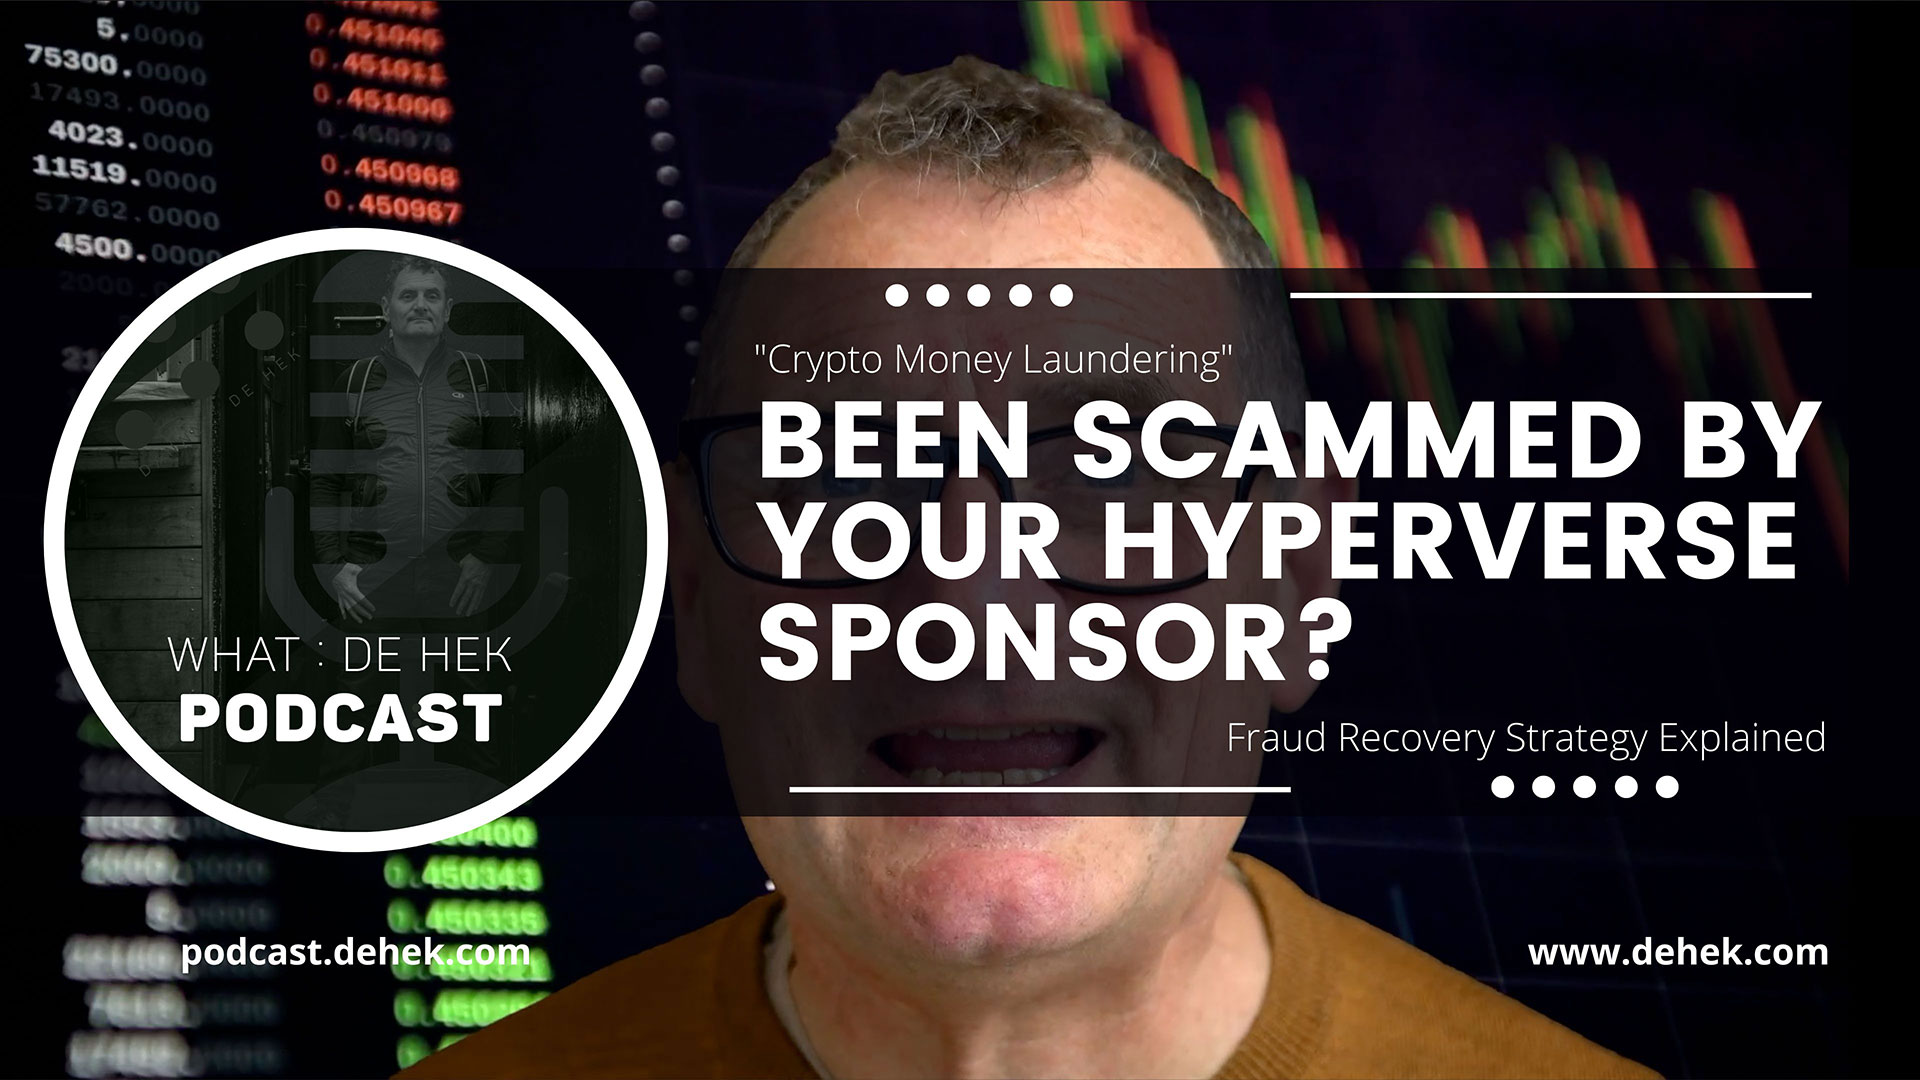 Crypto Money Laundering Been Scammed by your HyperVerse Sponsor Fraud Recovery Strategy Explainednbsp› Entrepreneur Decision Maker Connector Podcaster Educator